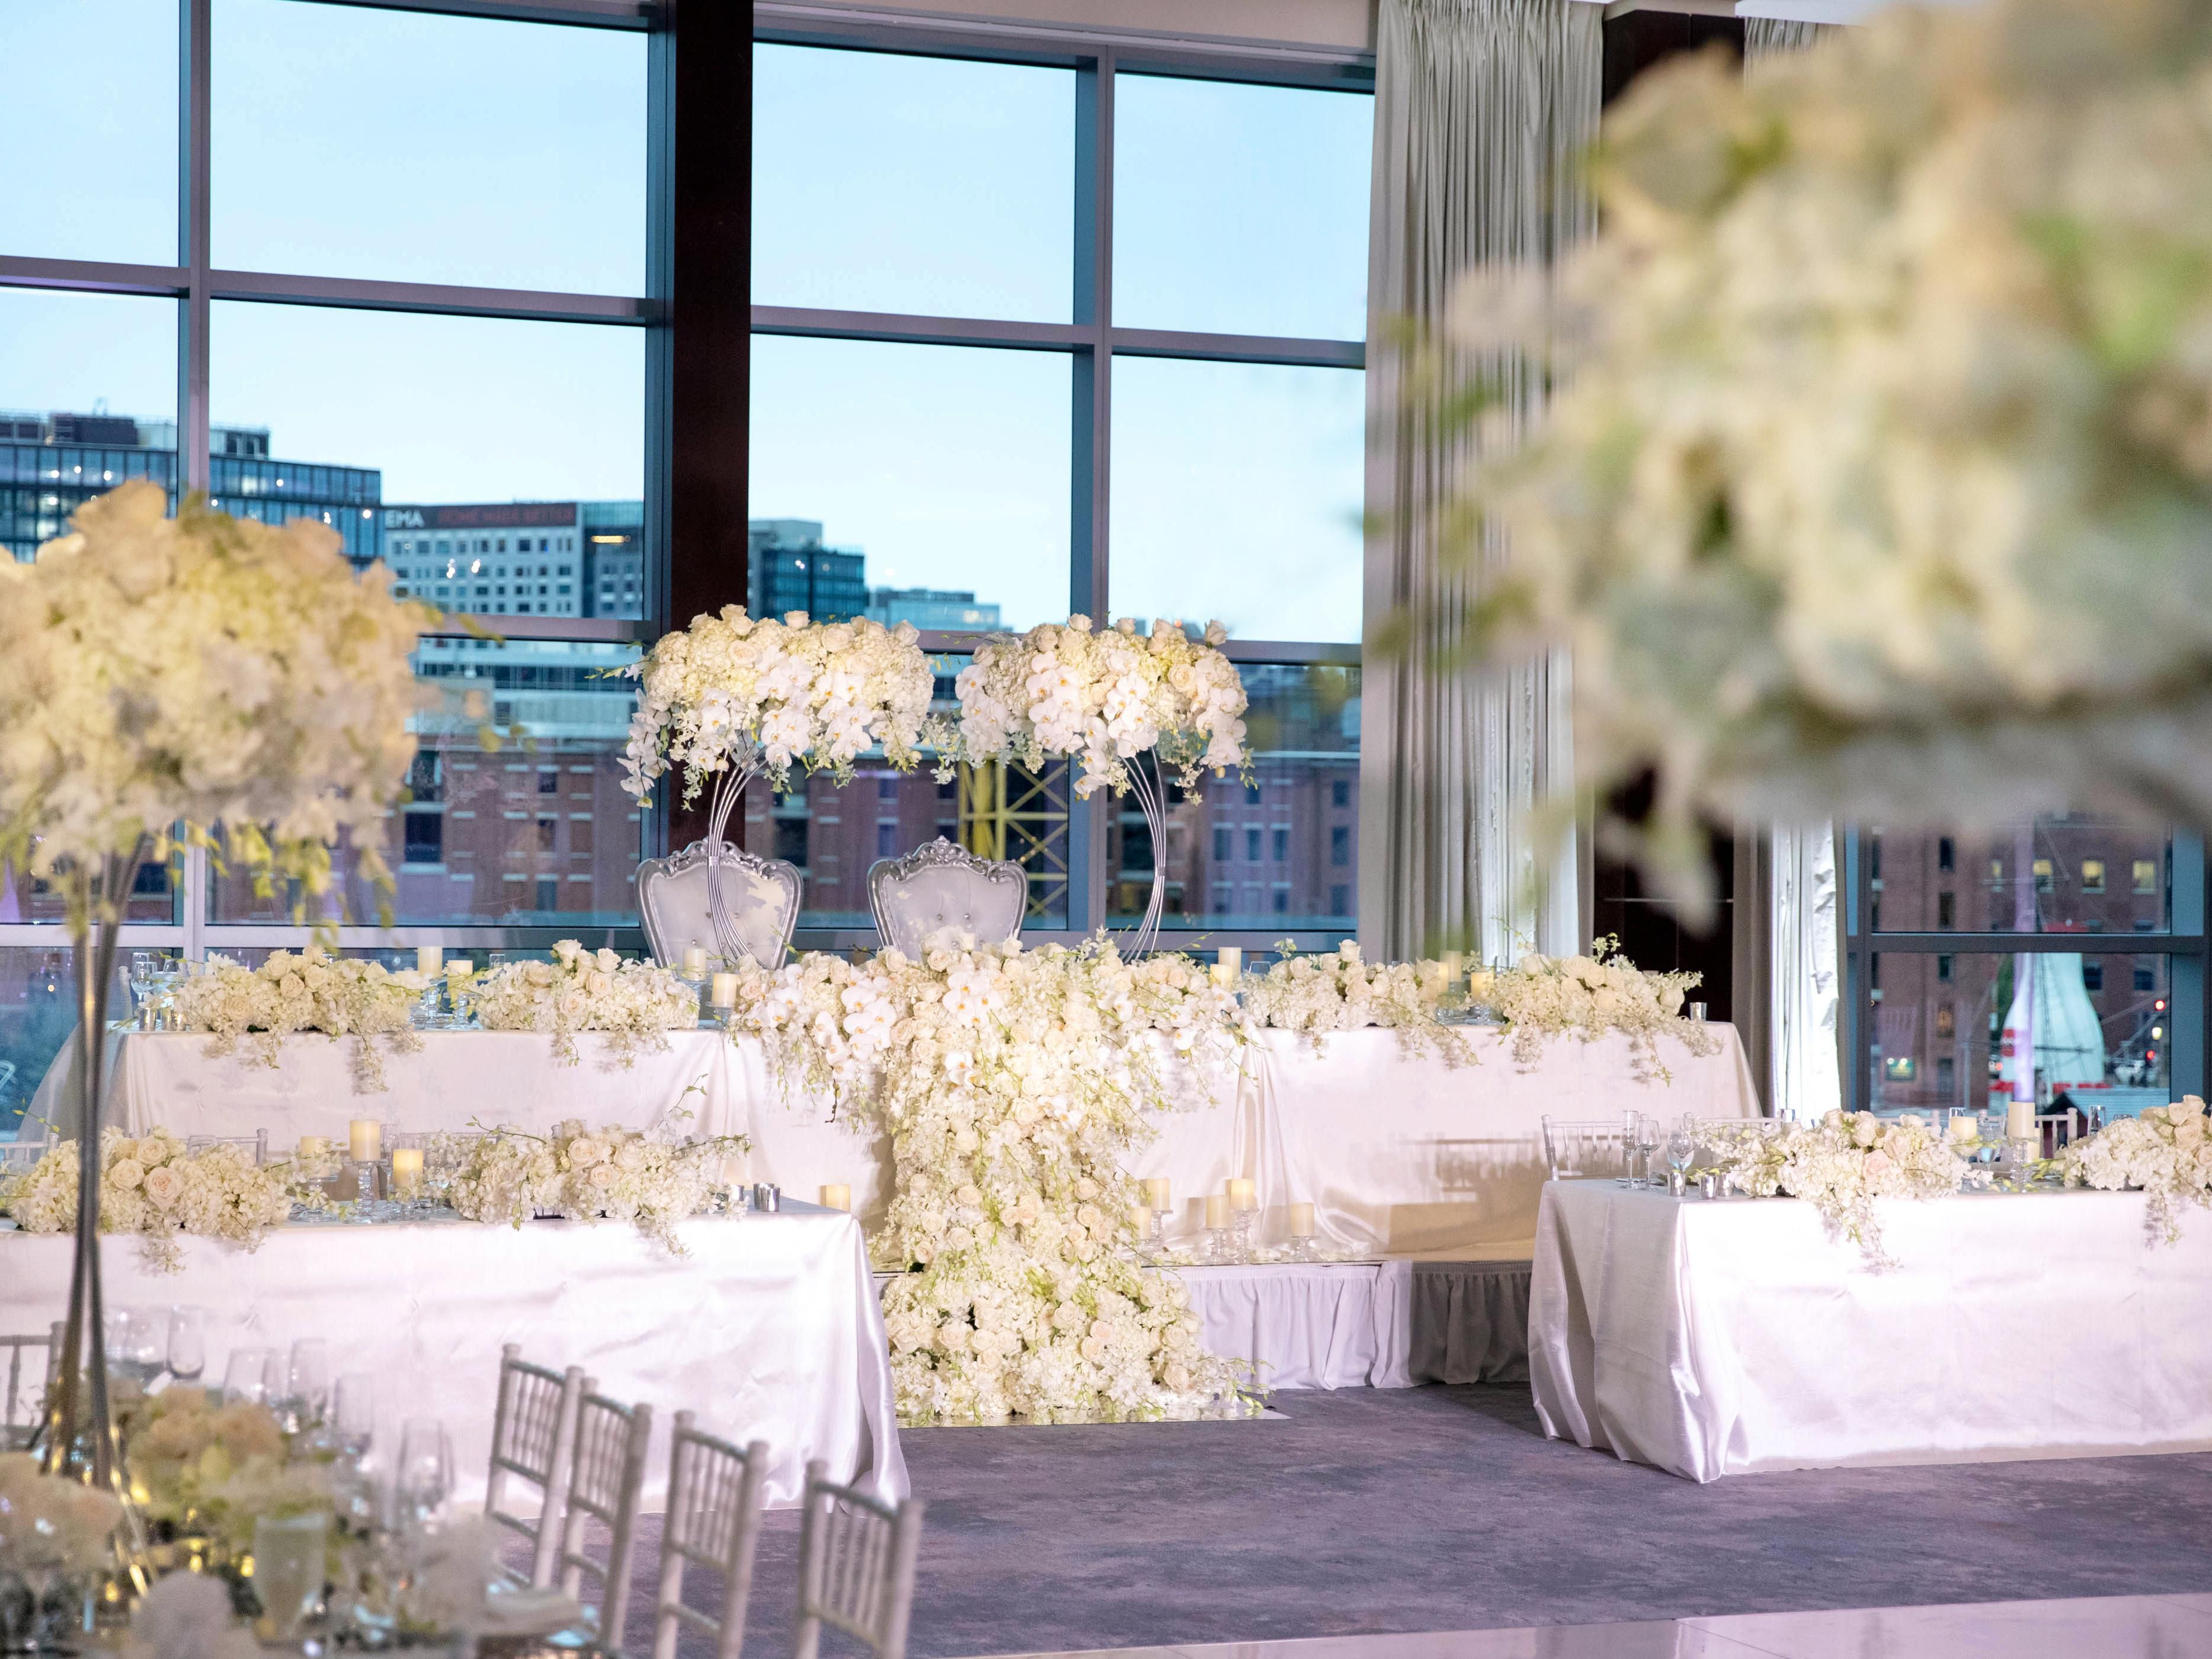 Rose Kennedy Ballroom overlooking Fort Point Channel